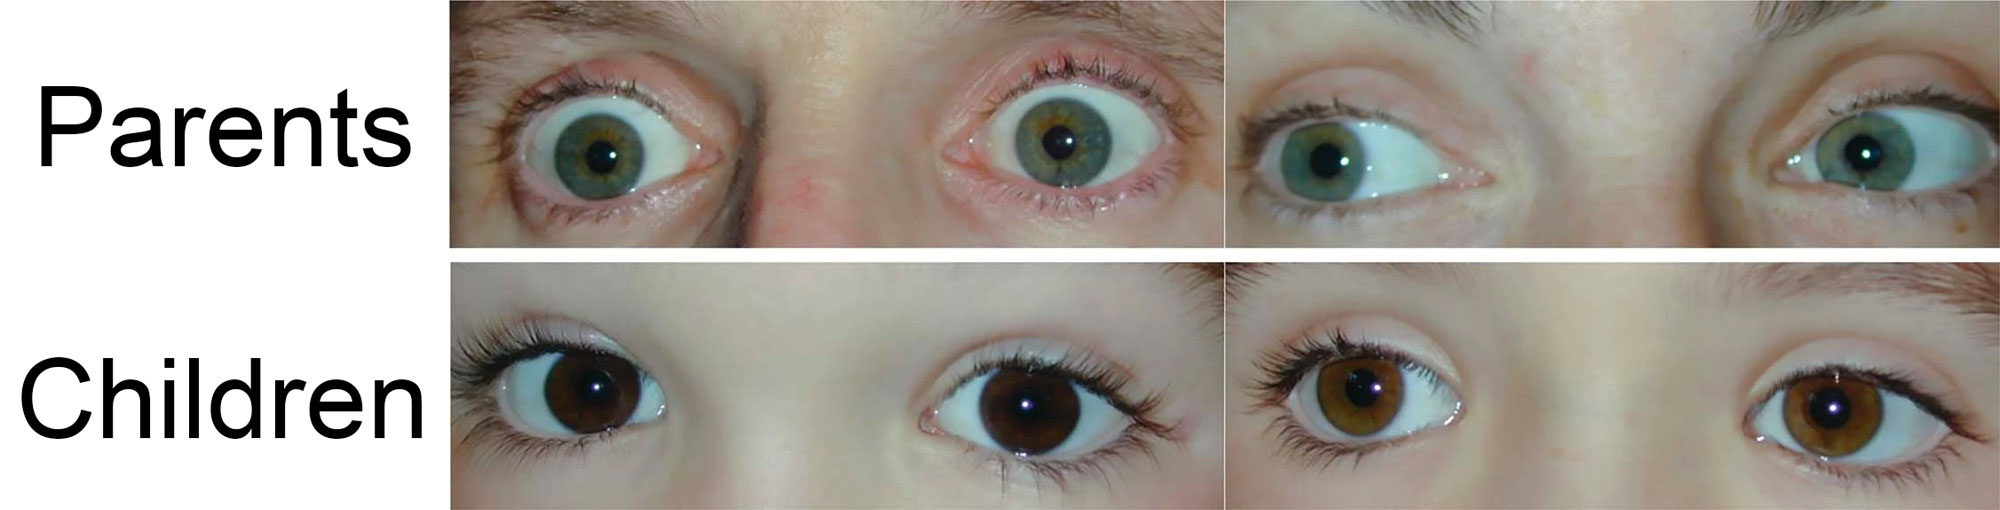 Two pairs of photographs showing eye color in a pair of parents and their two children. The parents each have blue-green eyes, whereas the children and medium to dark brown eyes.